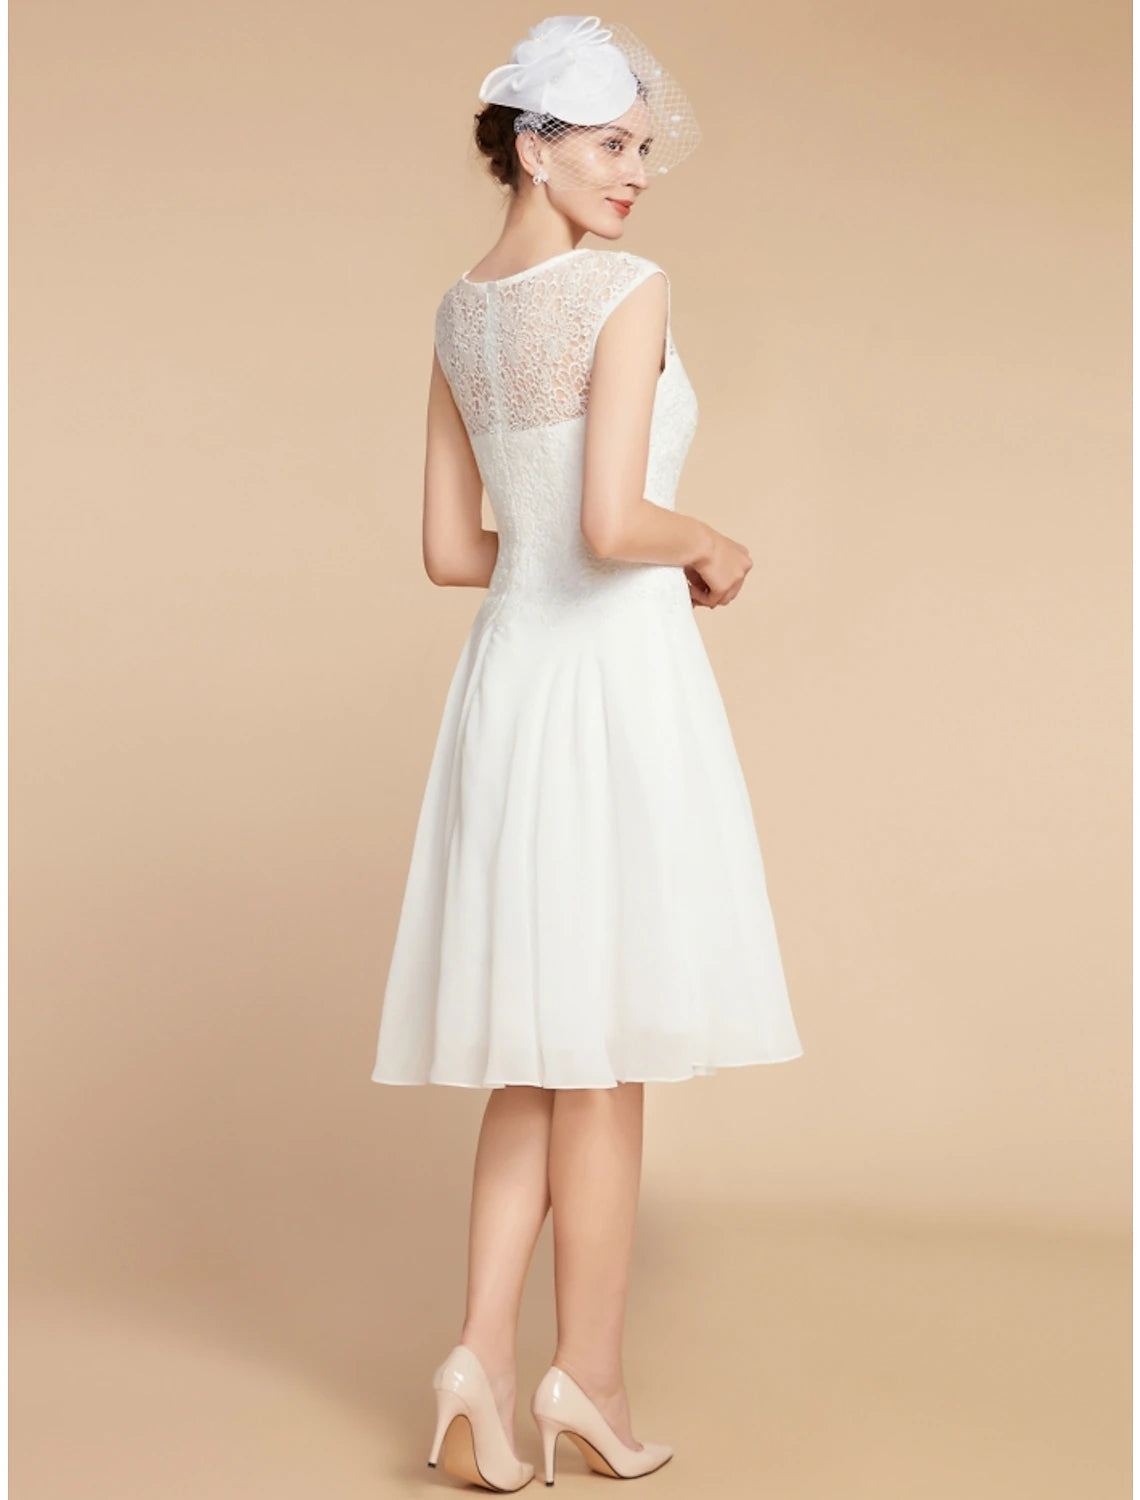 Two Piece A-Line Mother of the Bride Dress Wedding Guest Elegant Petite Jewel Neck Knee Length Chiffon Lace 3/4 Length Sleeve with Pleats Solid Color